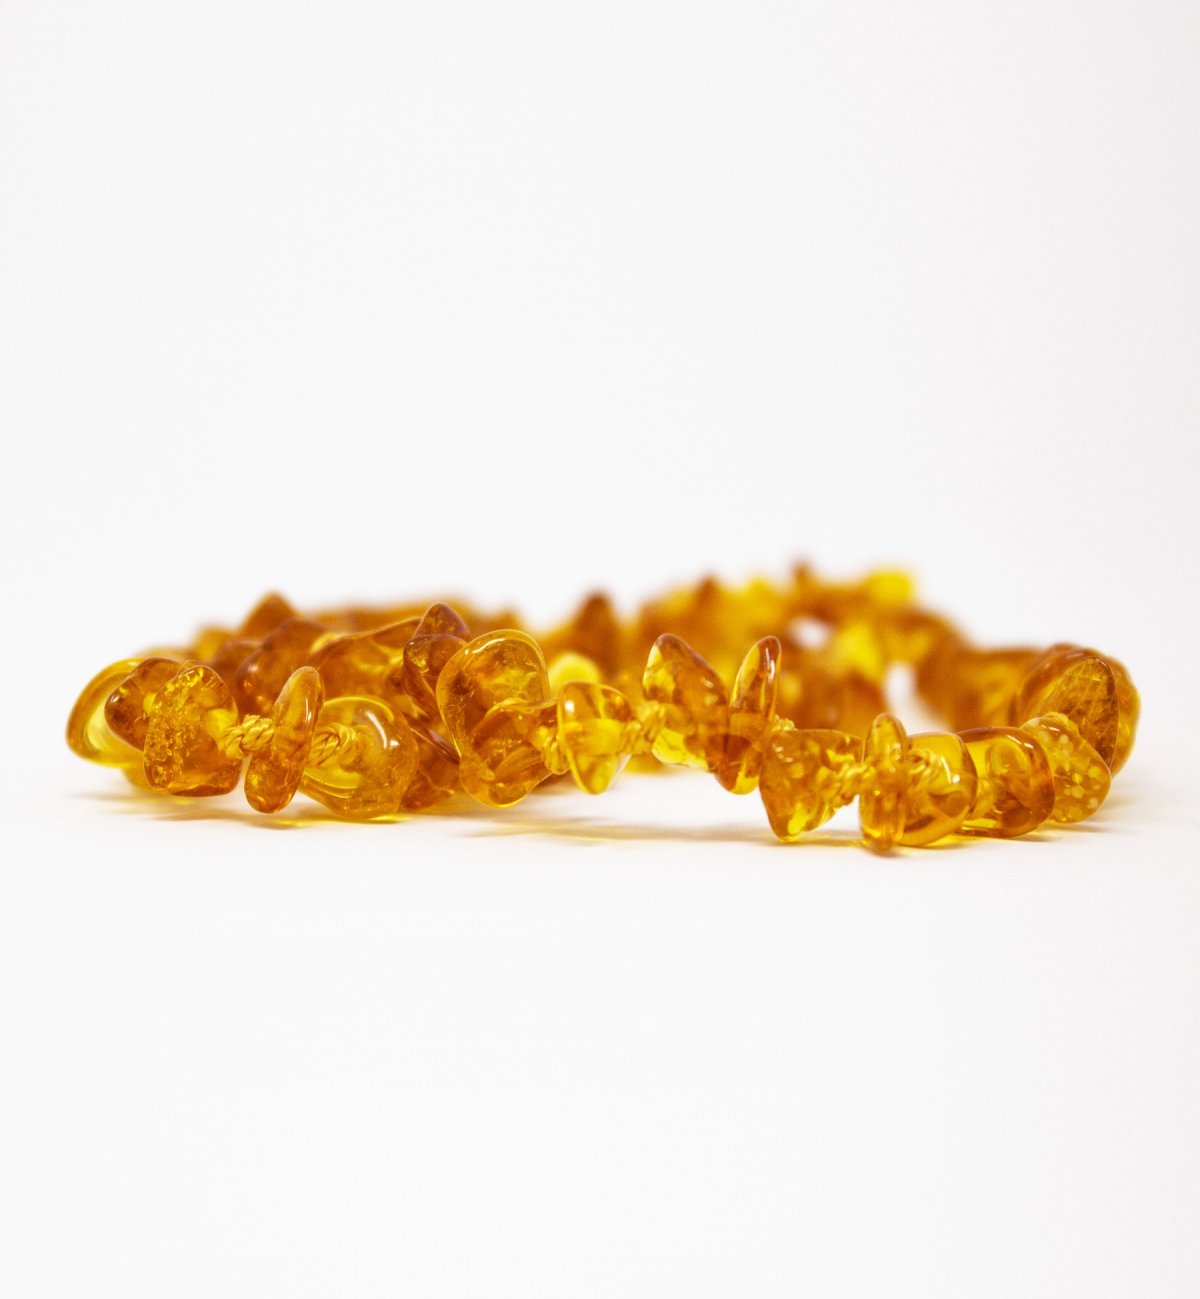 Honey-coloured amber baby necklace with Kadolis safety clasp